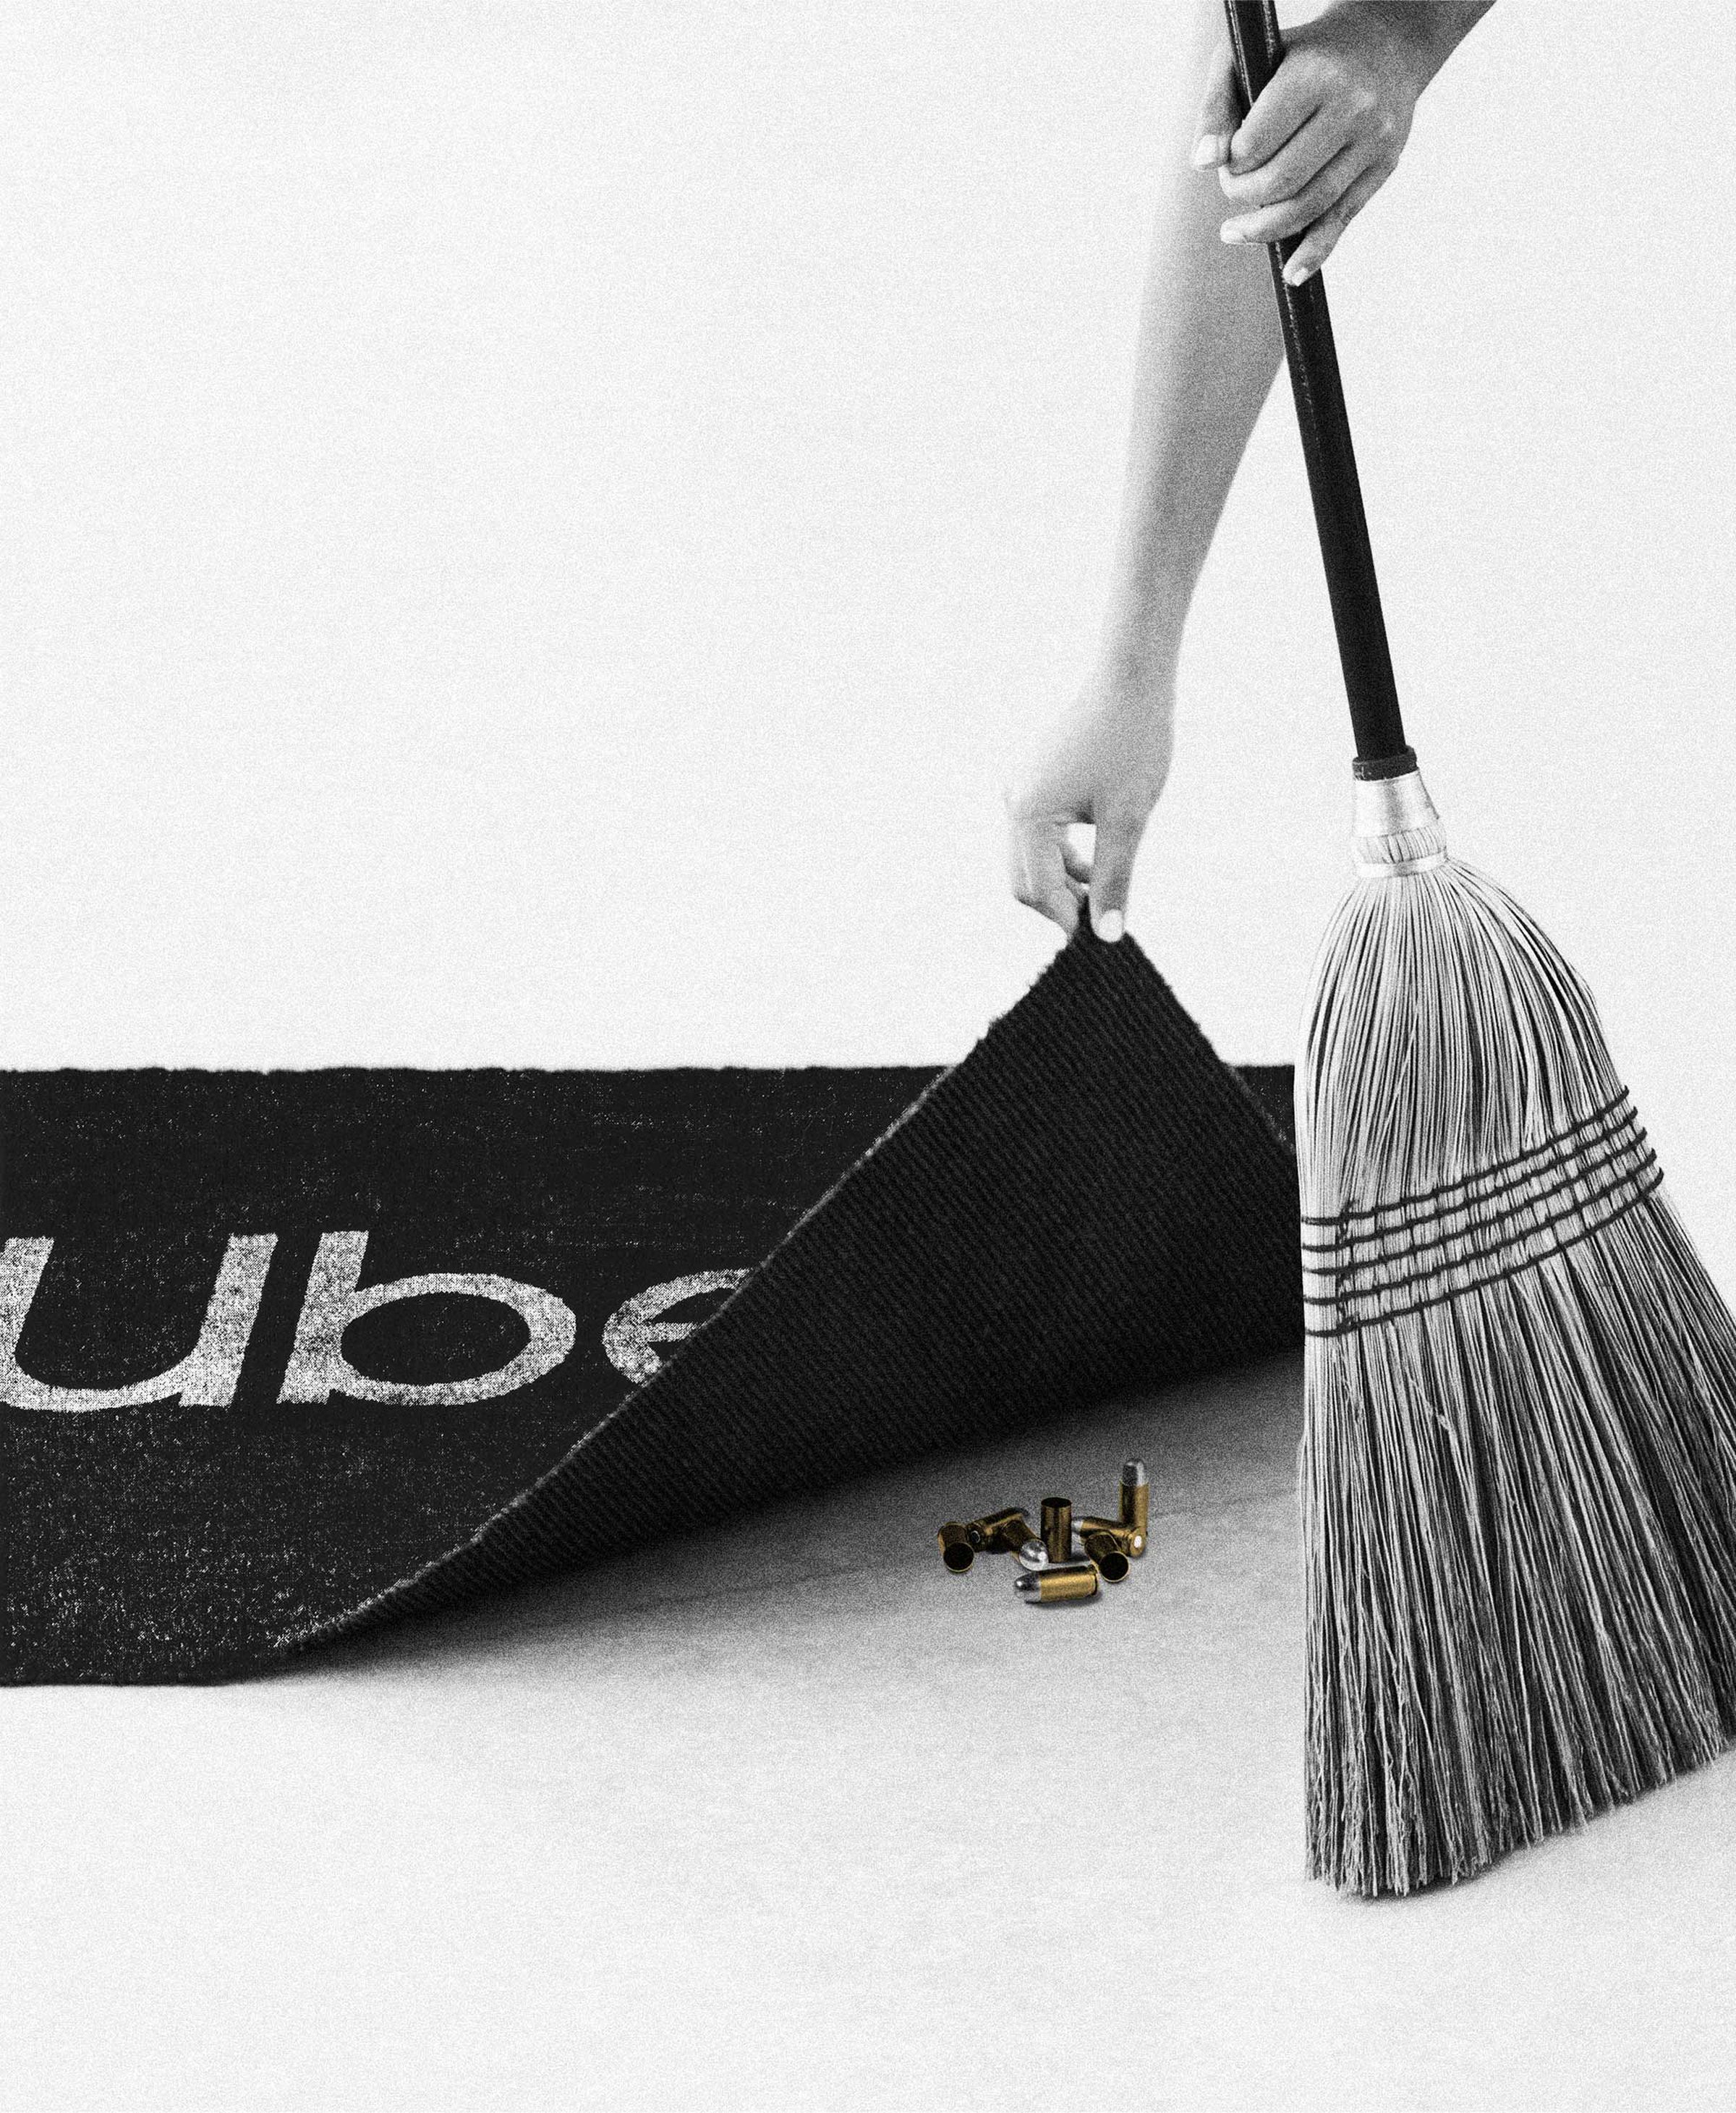 A broom sweeps bullets under a rug that says “Uber”